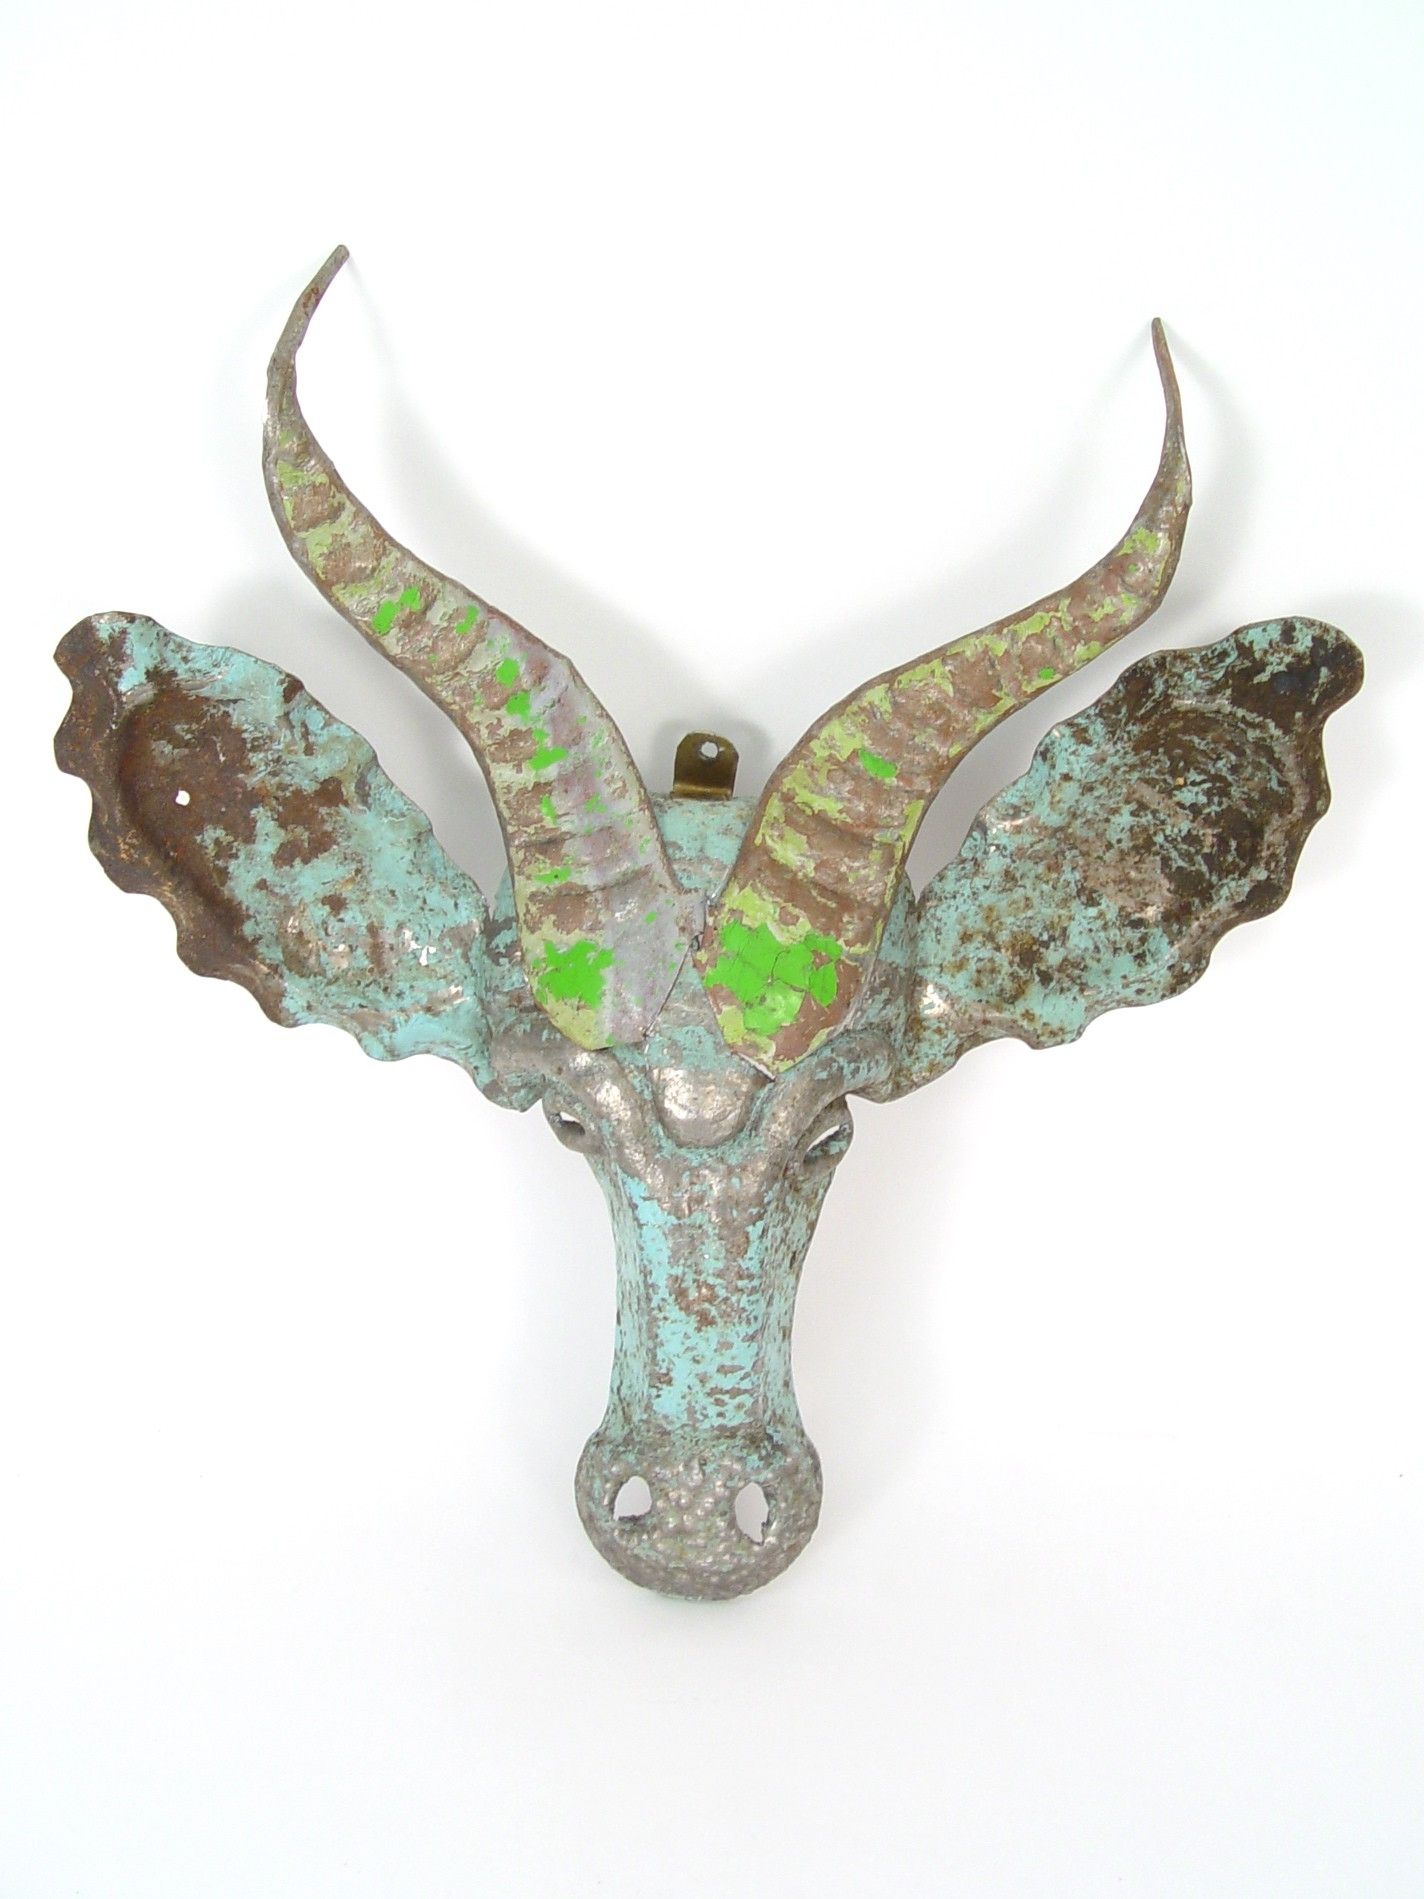 Recycled Metal Art (View 14 of 15)